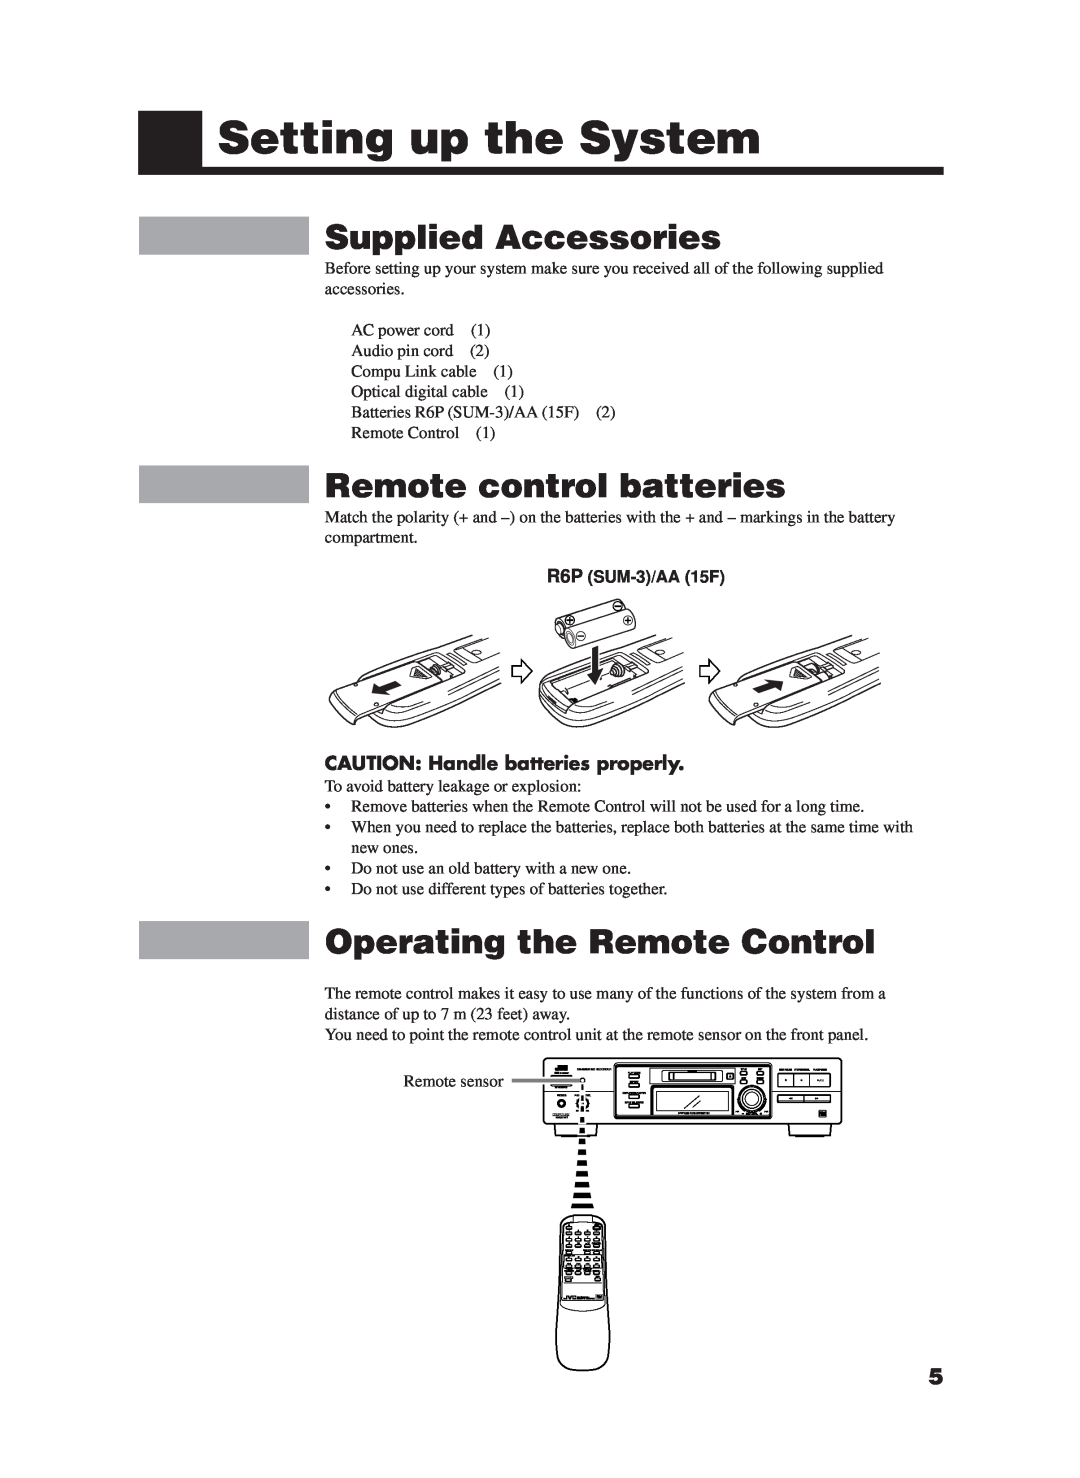 JVC XM-228BK manual Setting up the System, Supplied Accessories, Remote control batteries, Operating the Remote Control 